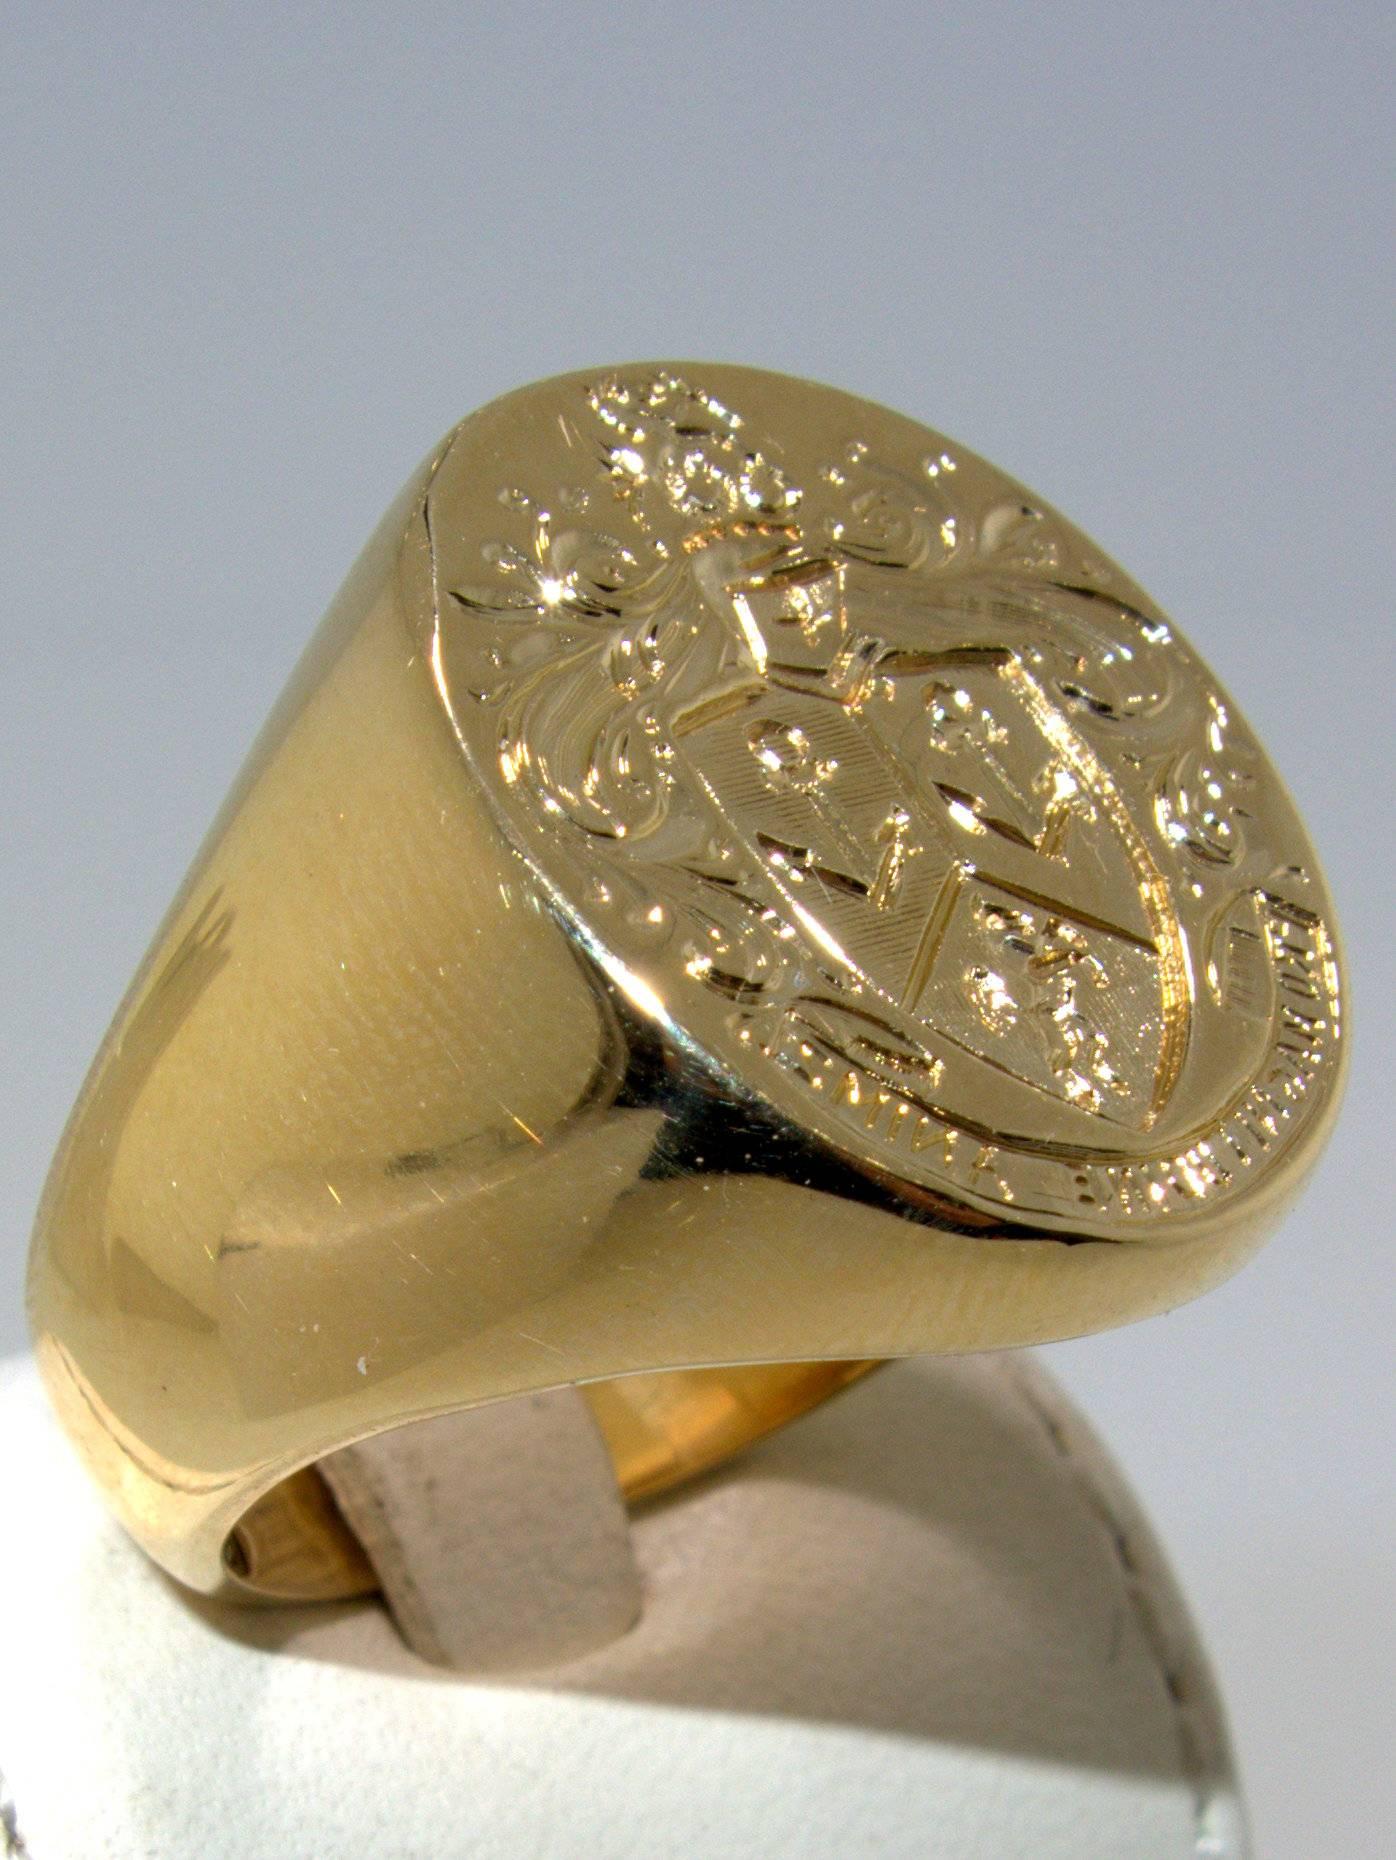 Hand made in 14K with well crafted signet ring has in Latin inscribed: " Do things with friendship in mind".  This ring is now a 12 1/4.  We can size it up or down if need be.